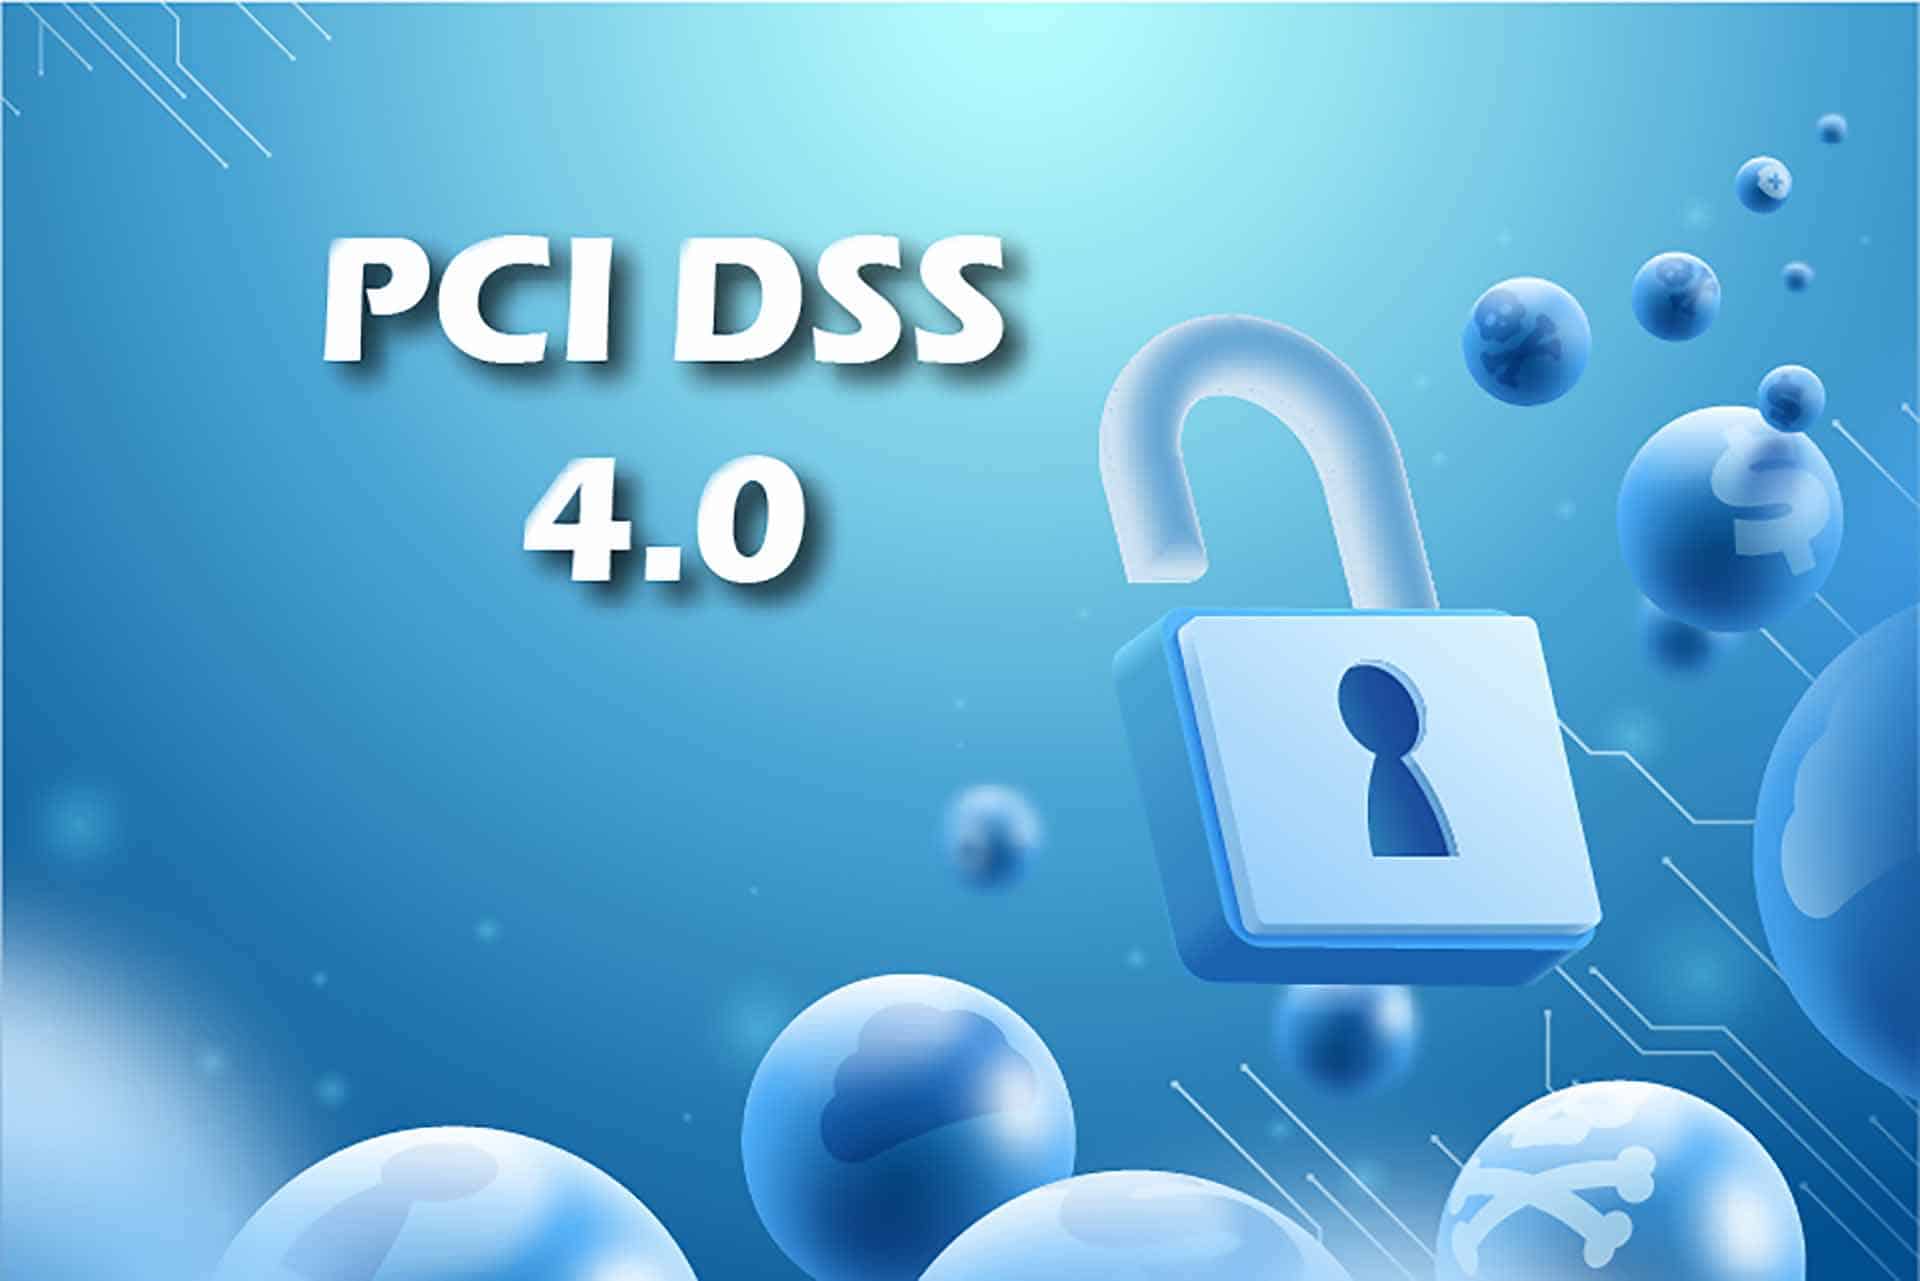 PCIDSS 4.0 from PCIDSS 3.2.1- Part 1